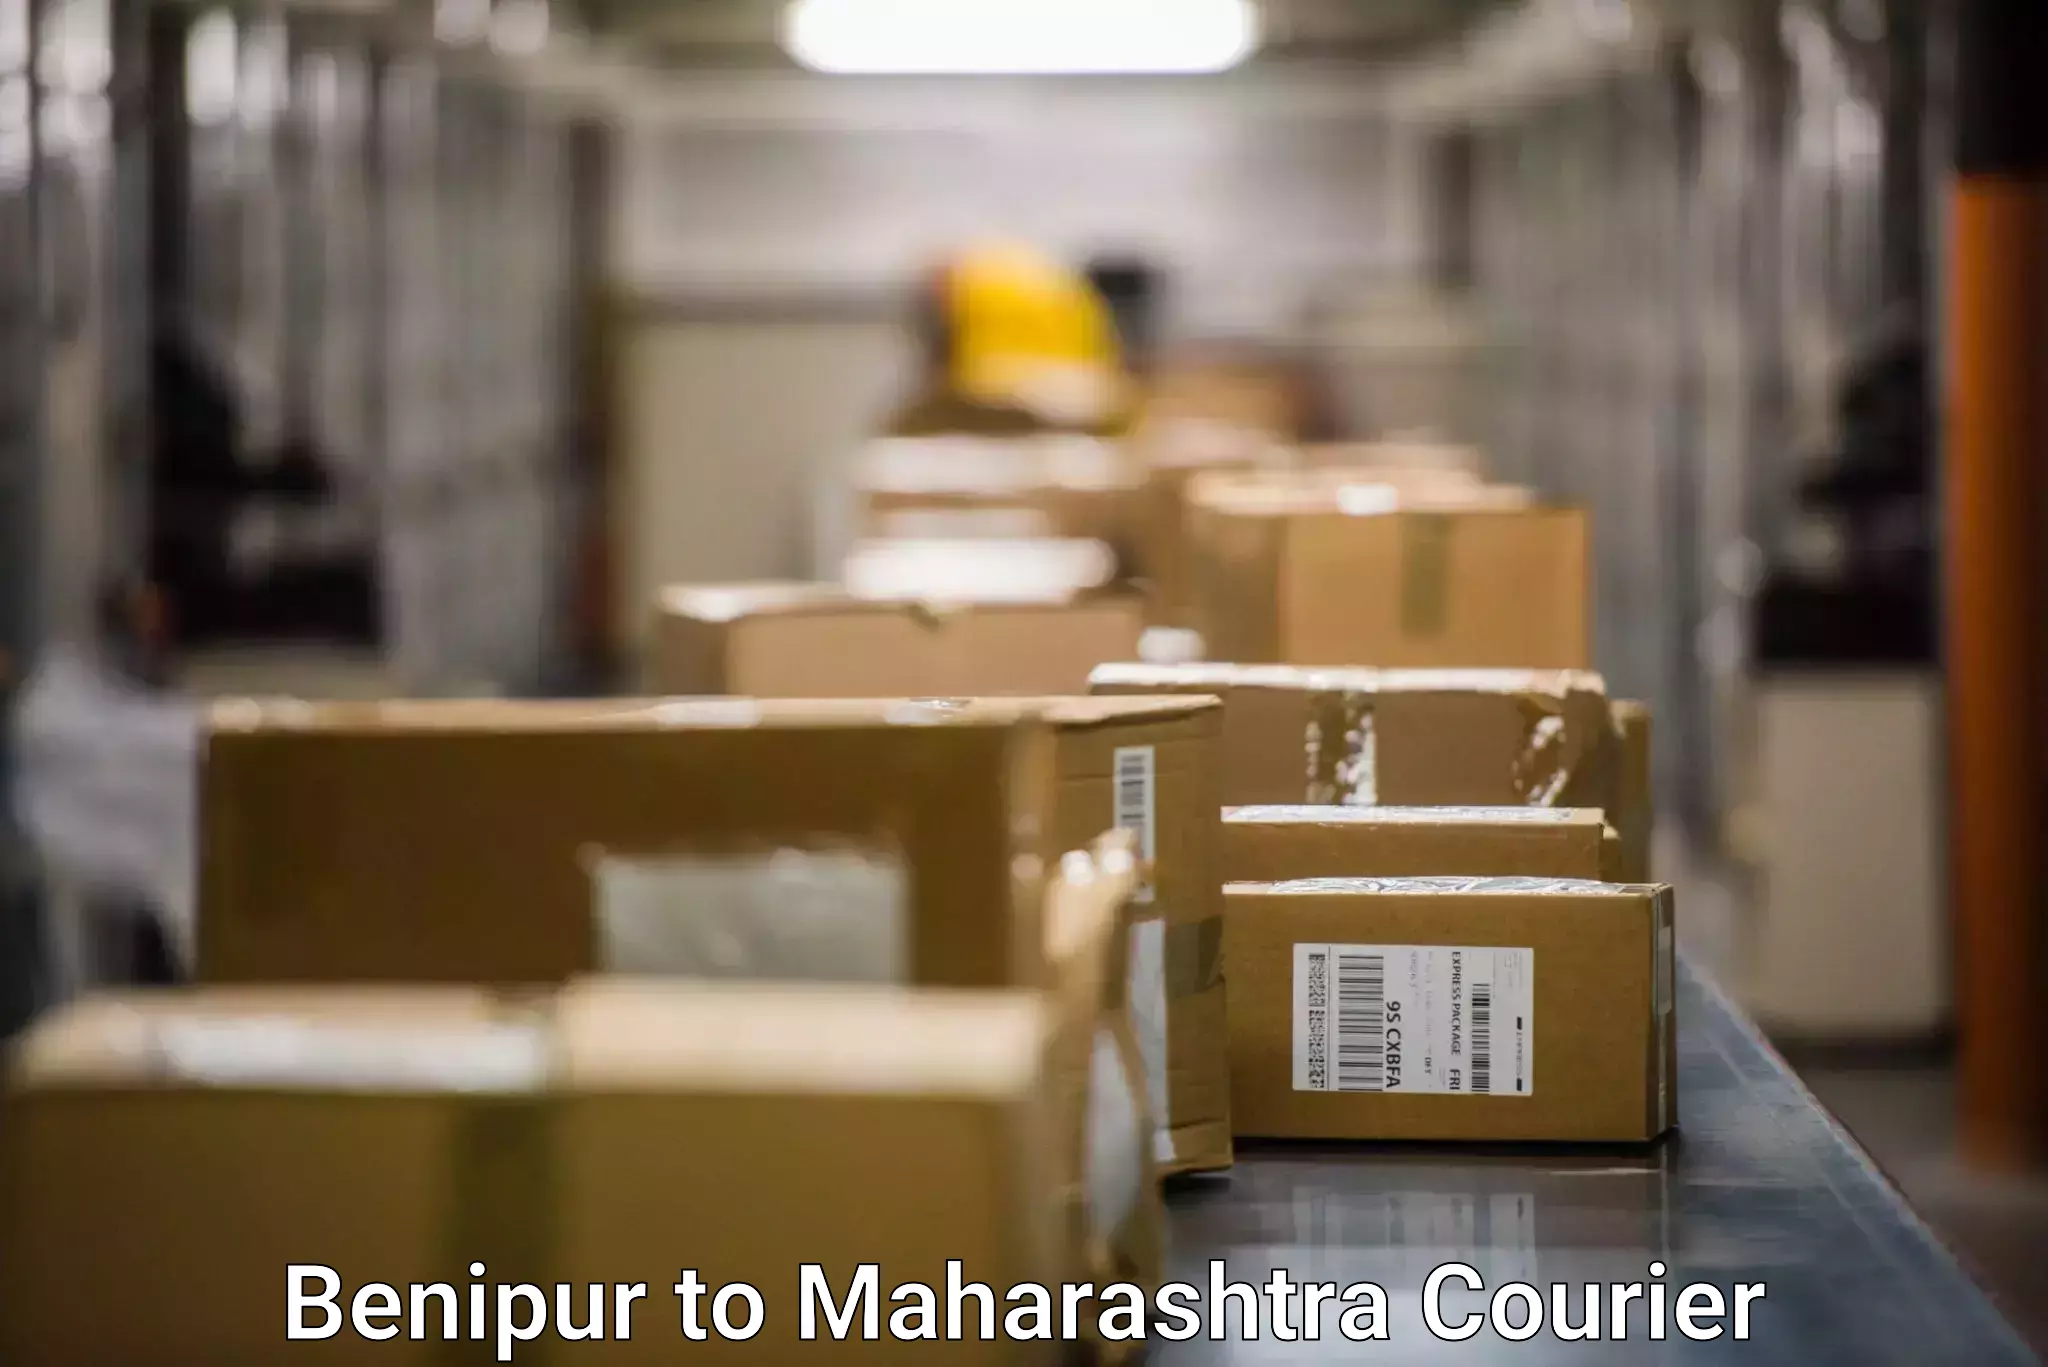 High-priority parcel service Benipur to Bhiwandi